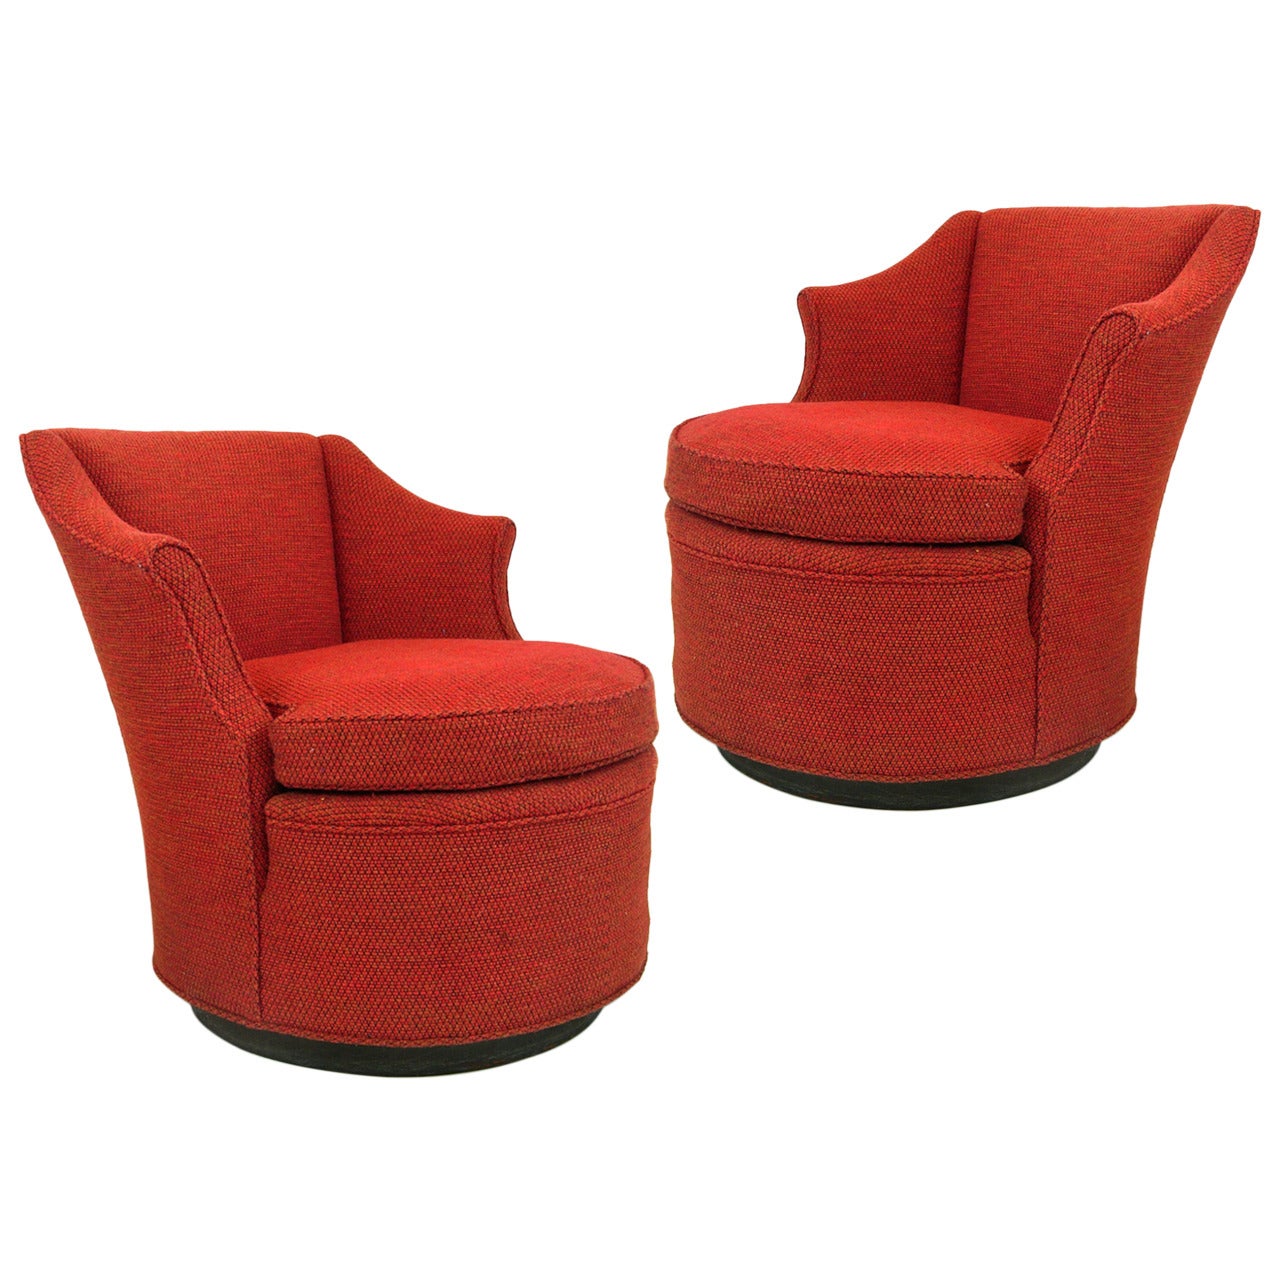 Pair of Red Swivel Chairs Attributed to Edward Wormley for Dunbar Furniture